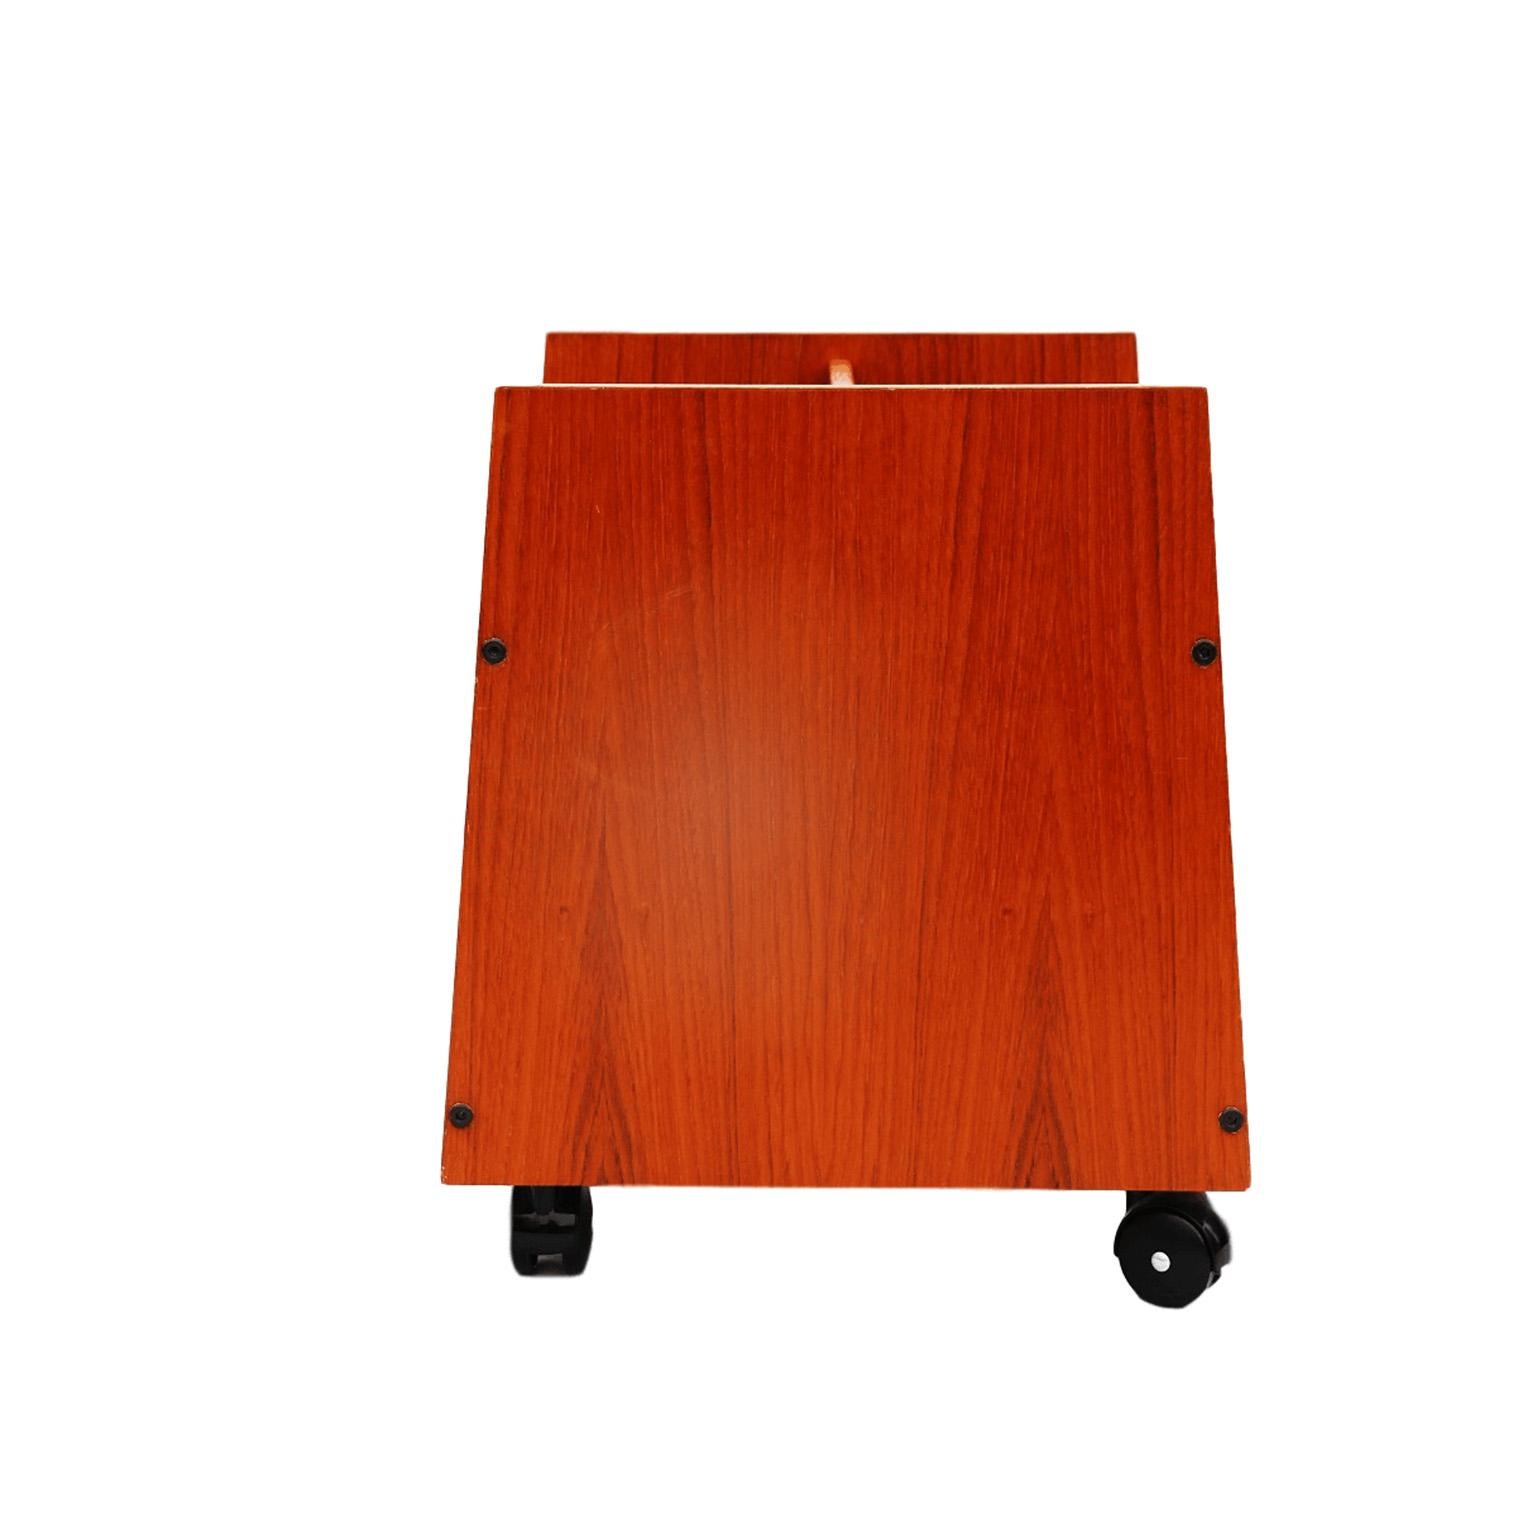 This beautiful vintage teak magazine holder is the perfect addition to your midcentury decor. Holds a ton of books and magazines and is built on beautiful vintage casters that roll smoothly and are very sturdy. Large enough to fit your record